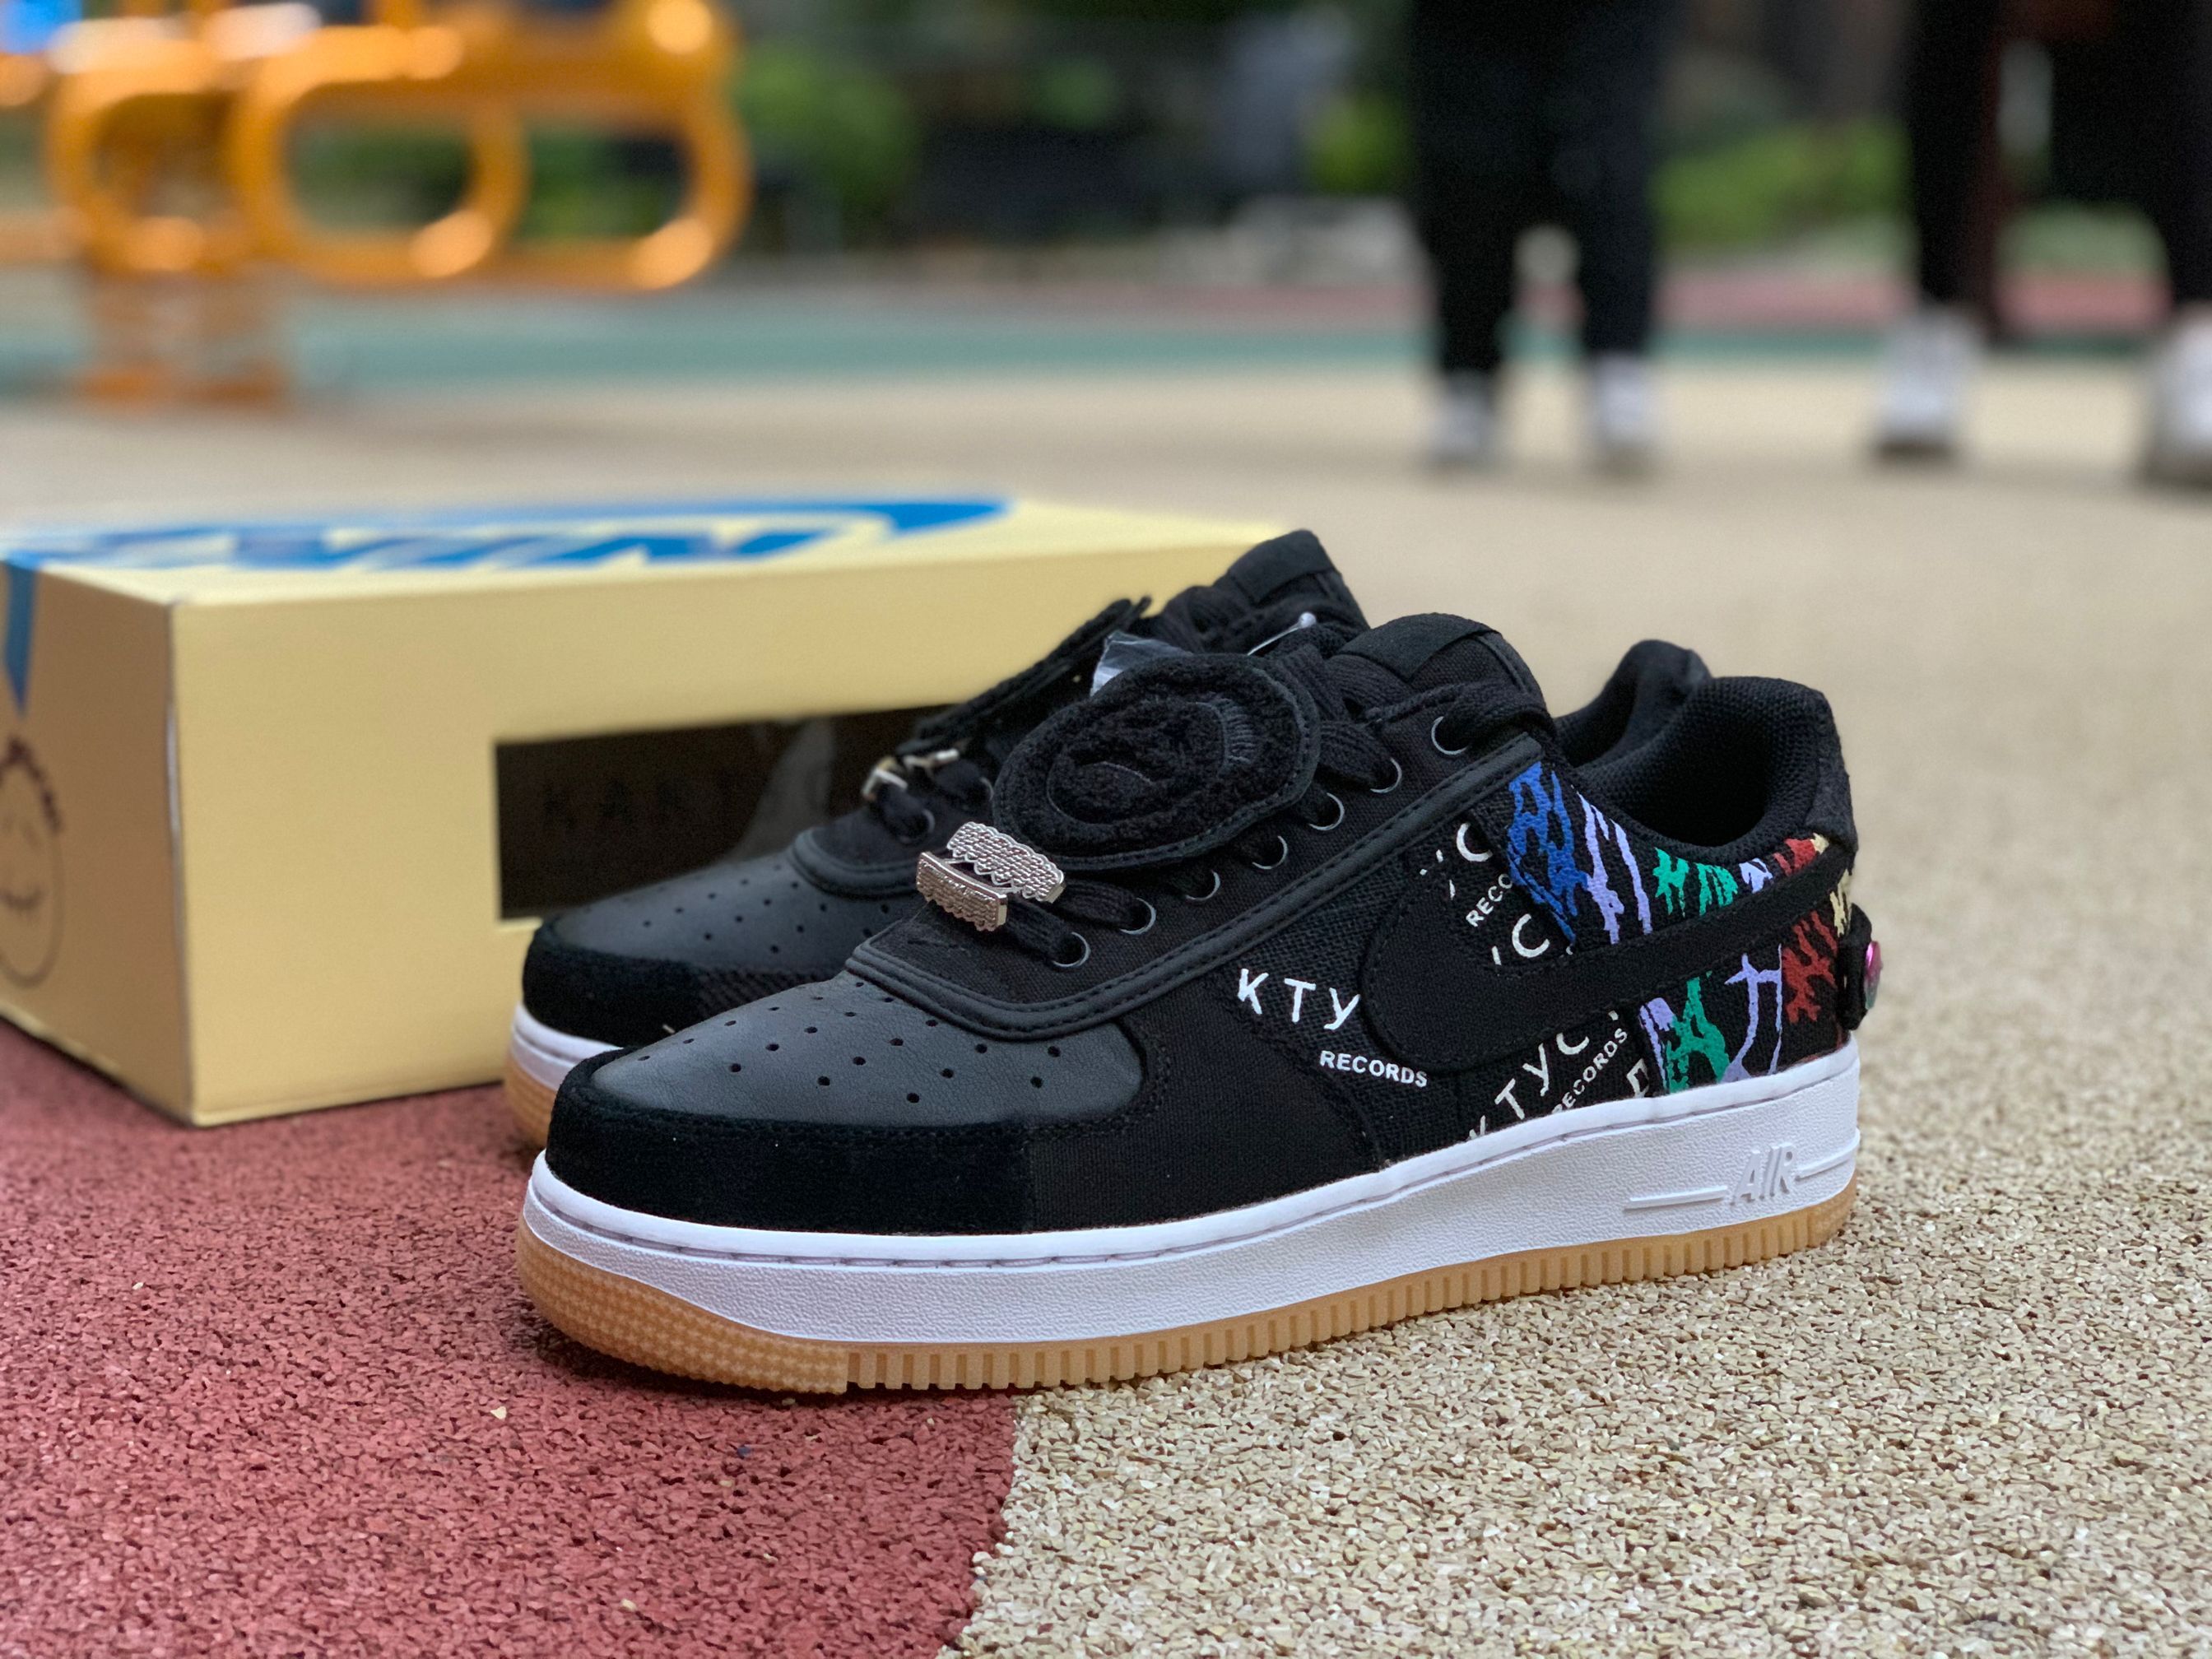 schuld Intens analyse nike air force 1 07 low premium cb34 edition - 001 - 2020 Nike Air Force 1  Low ts x Travis Scott For Wholesale CN2405